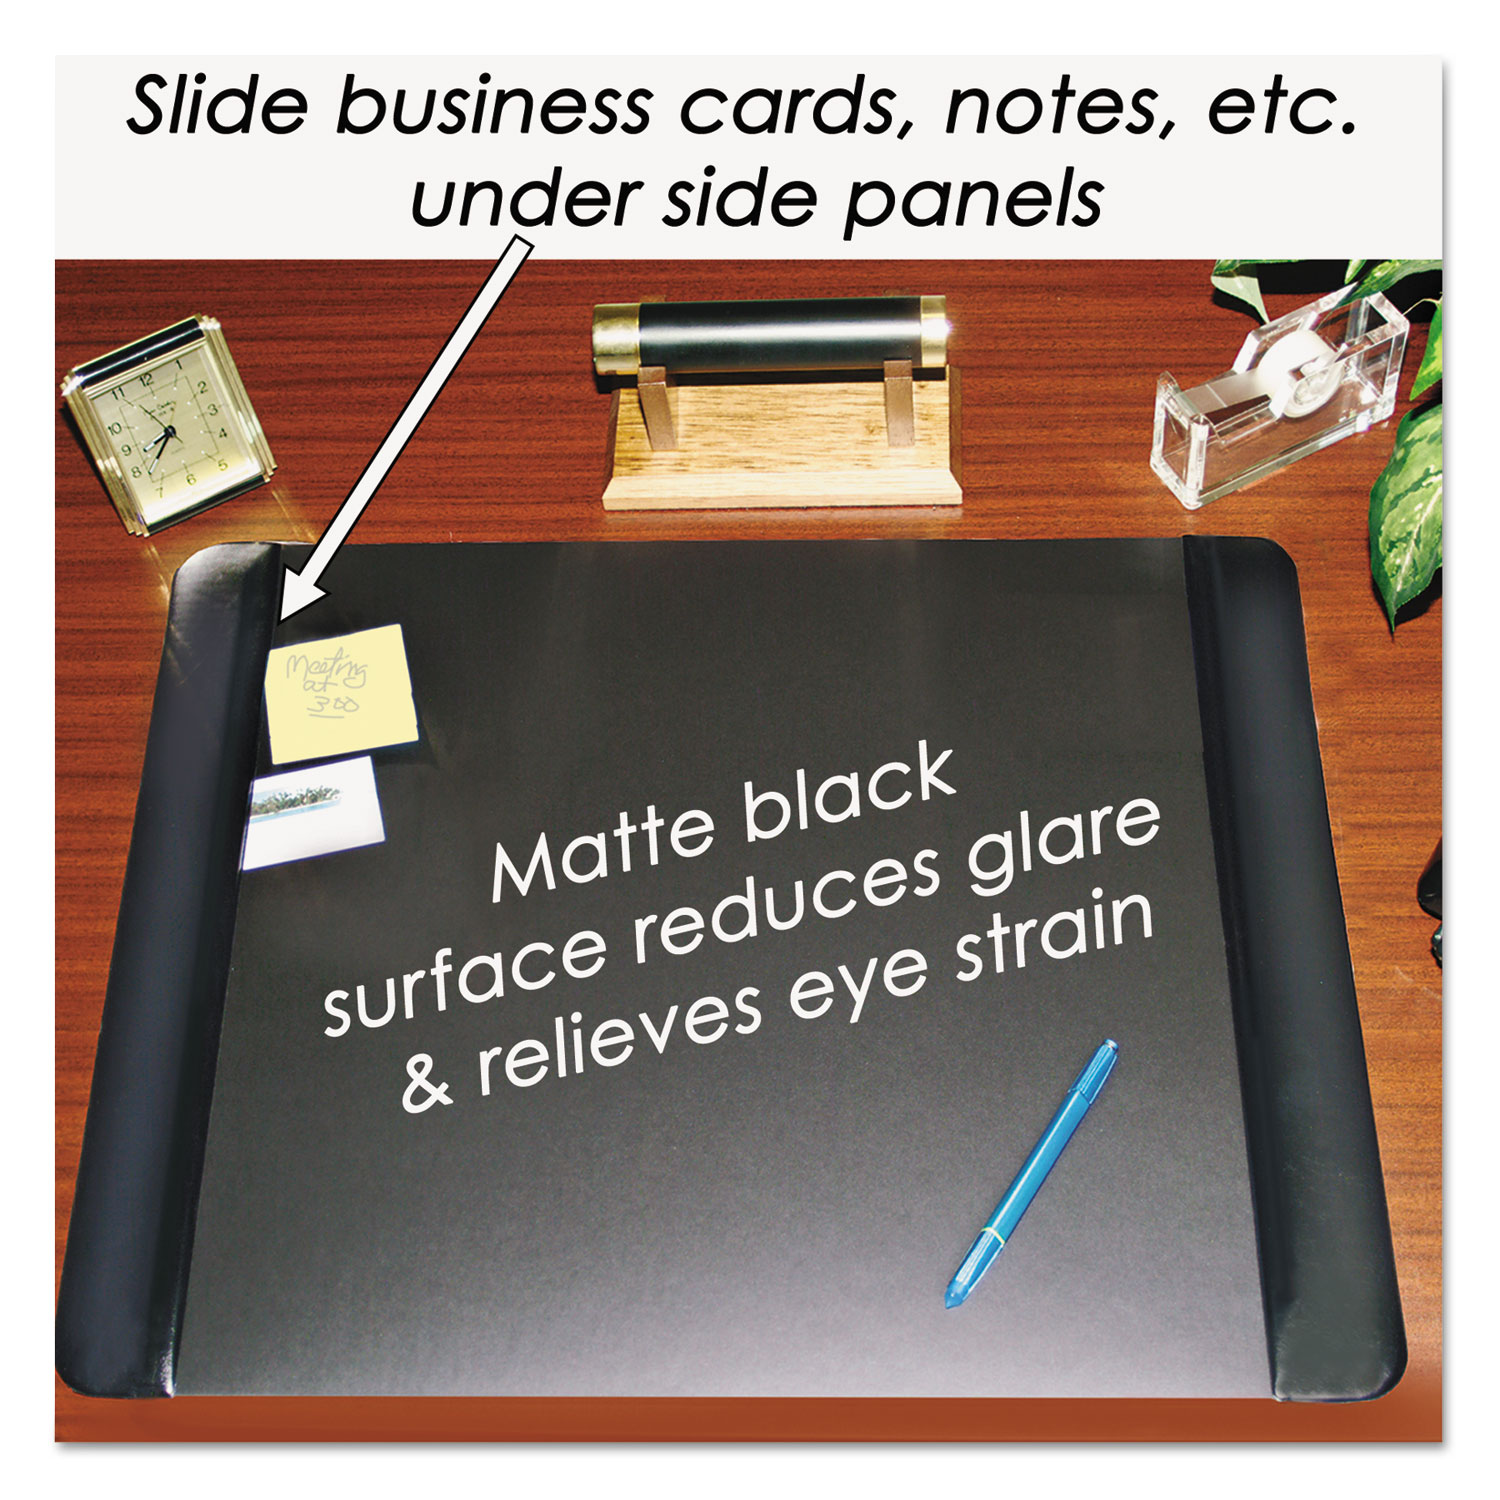 Executive Desk Pad with Leather-Like Side Panels, 36 x 20, Black